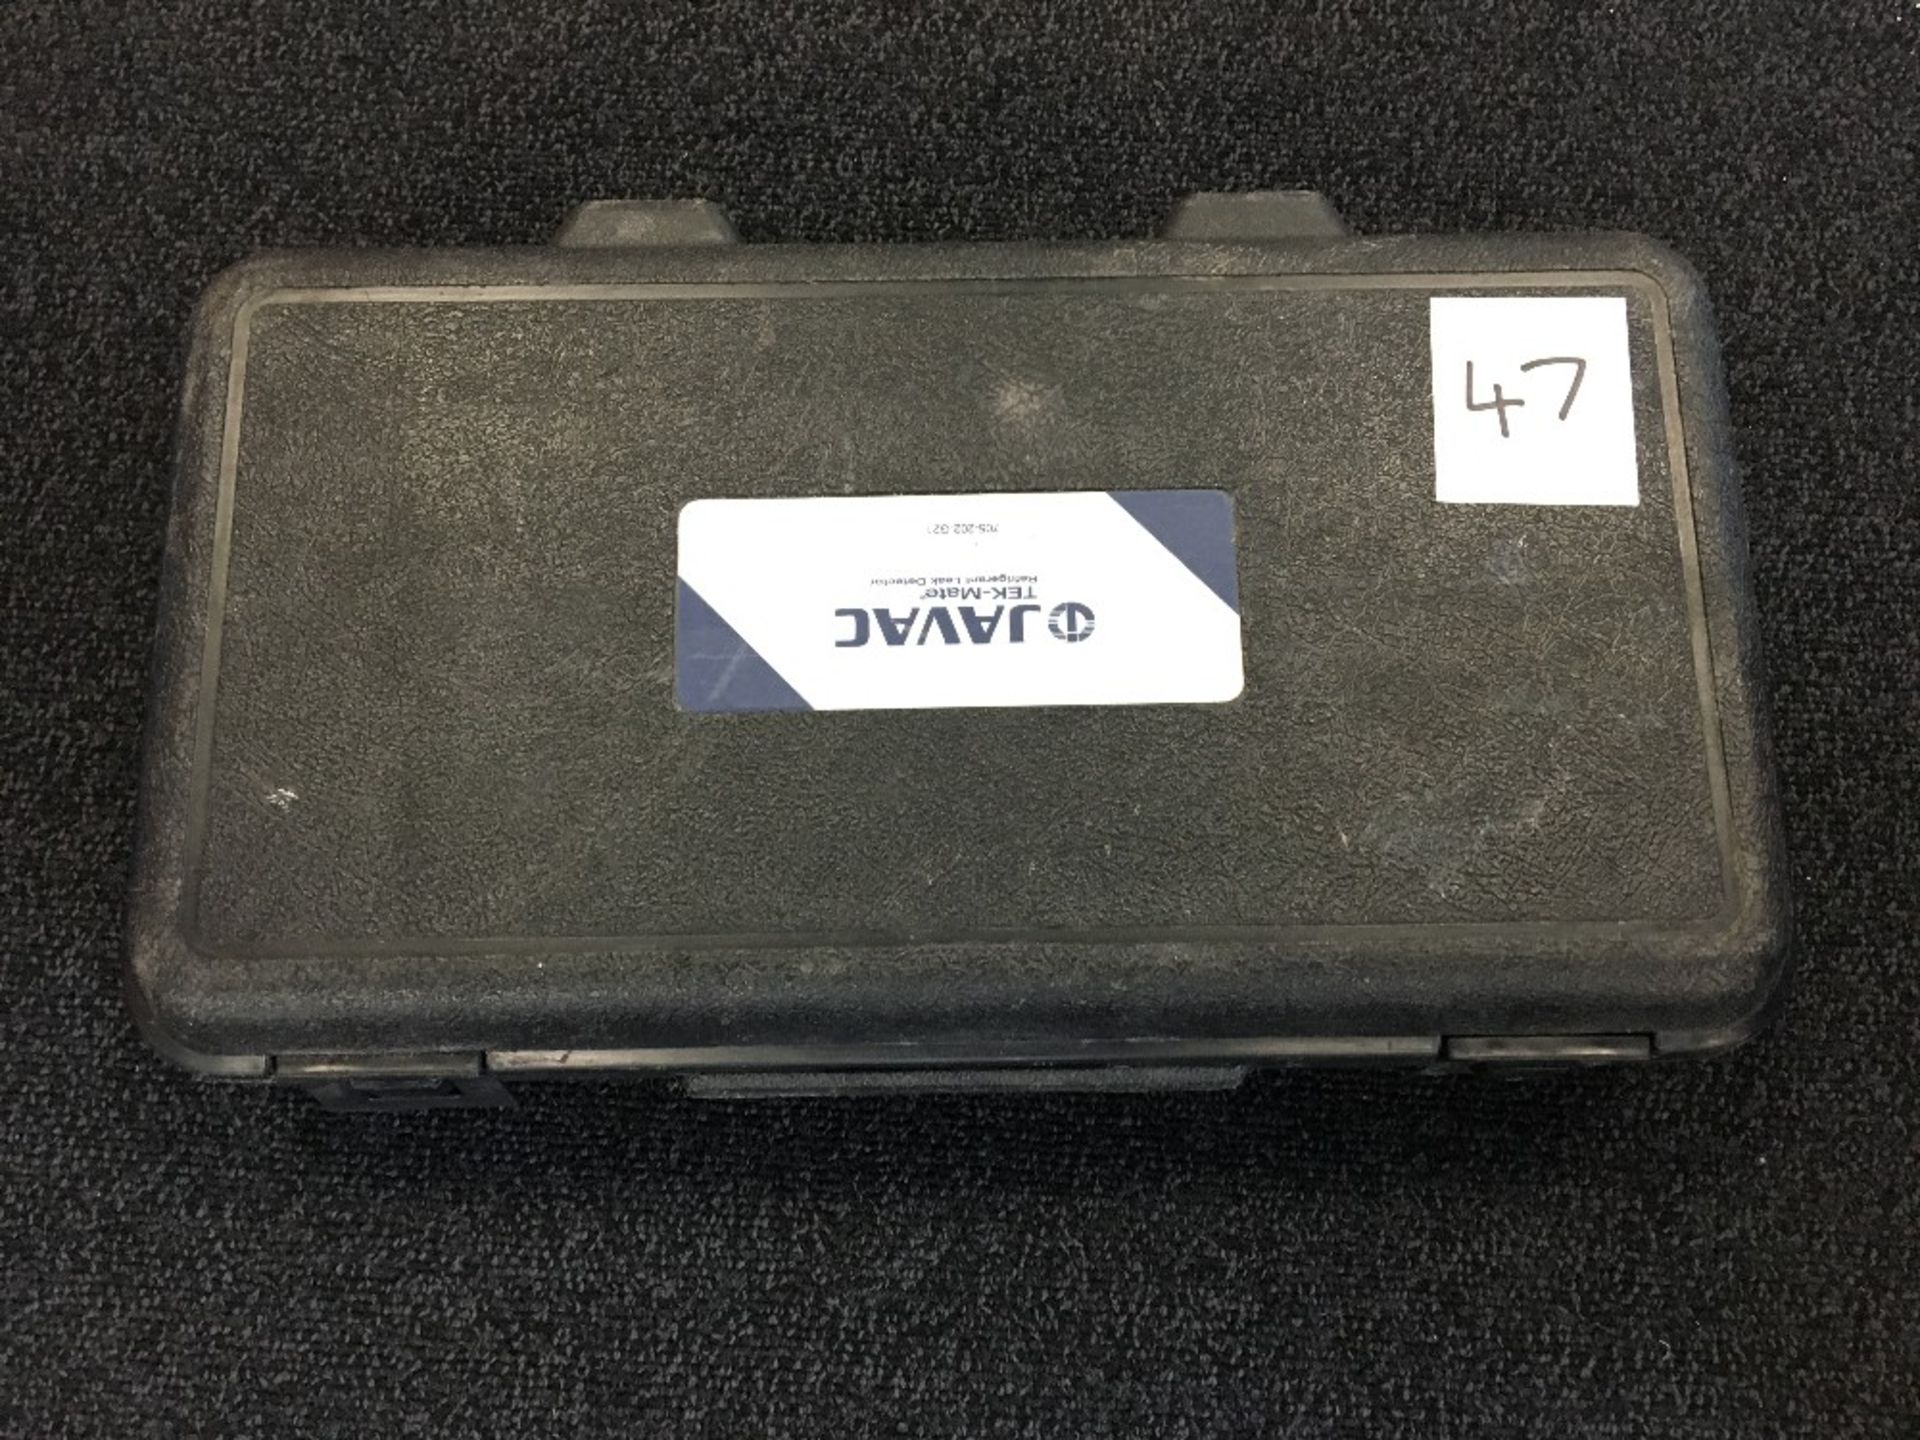 Javac Tekmate Refrigeration Leak Detector with carry case - Image 2 of 5